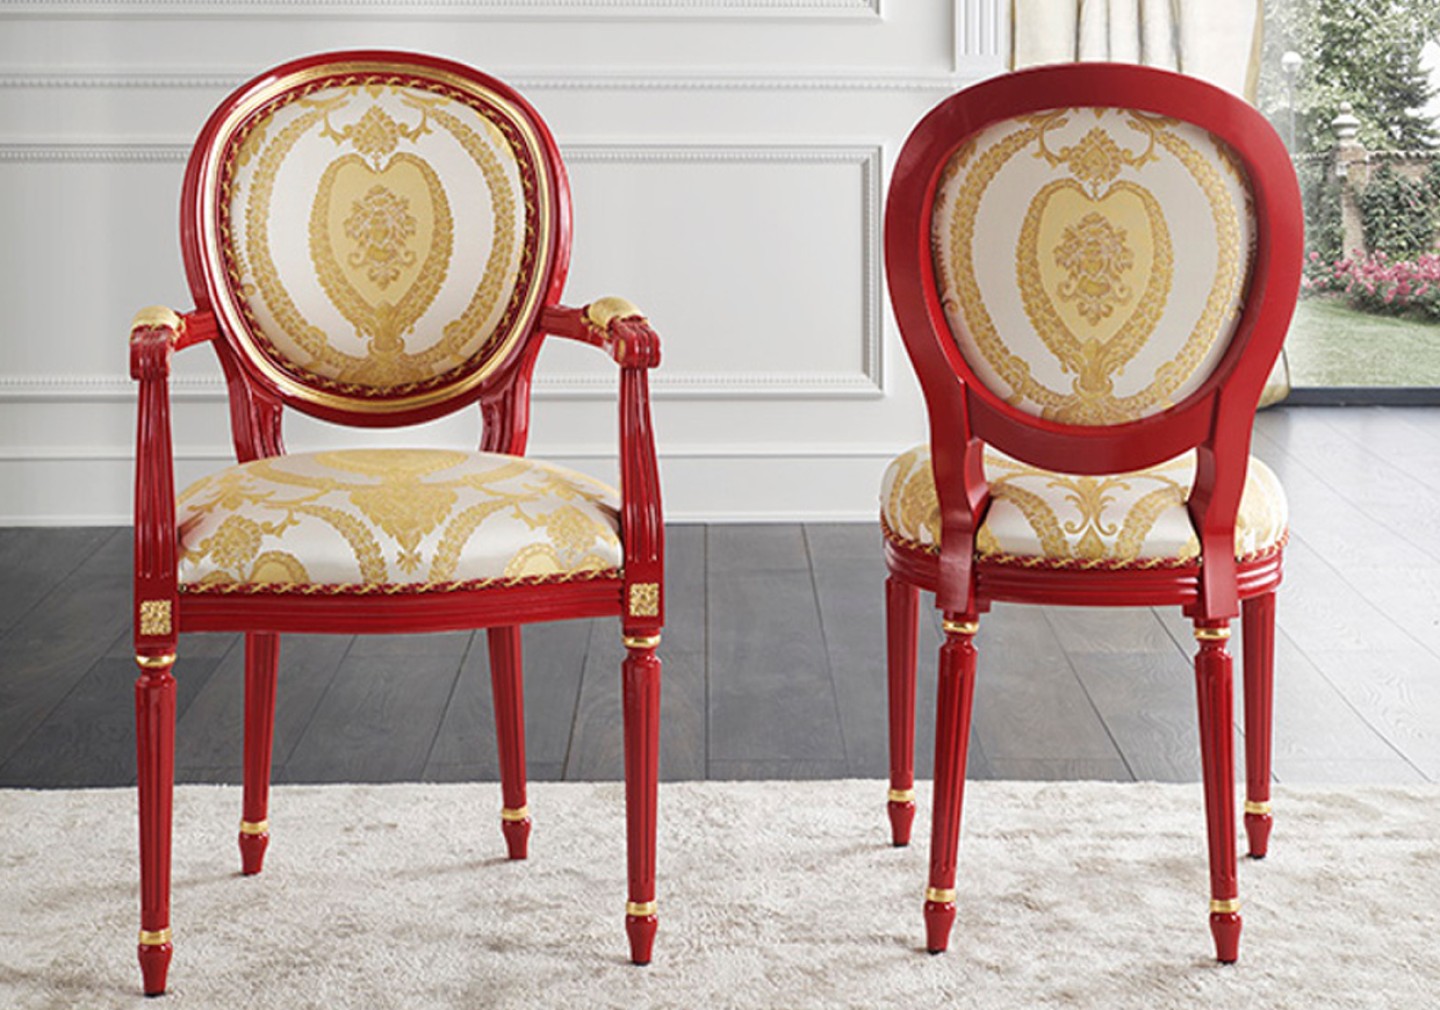 THE VENICE CLASSIC DINING CHAIR